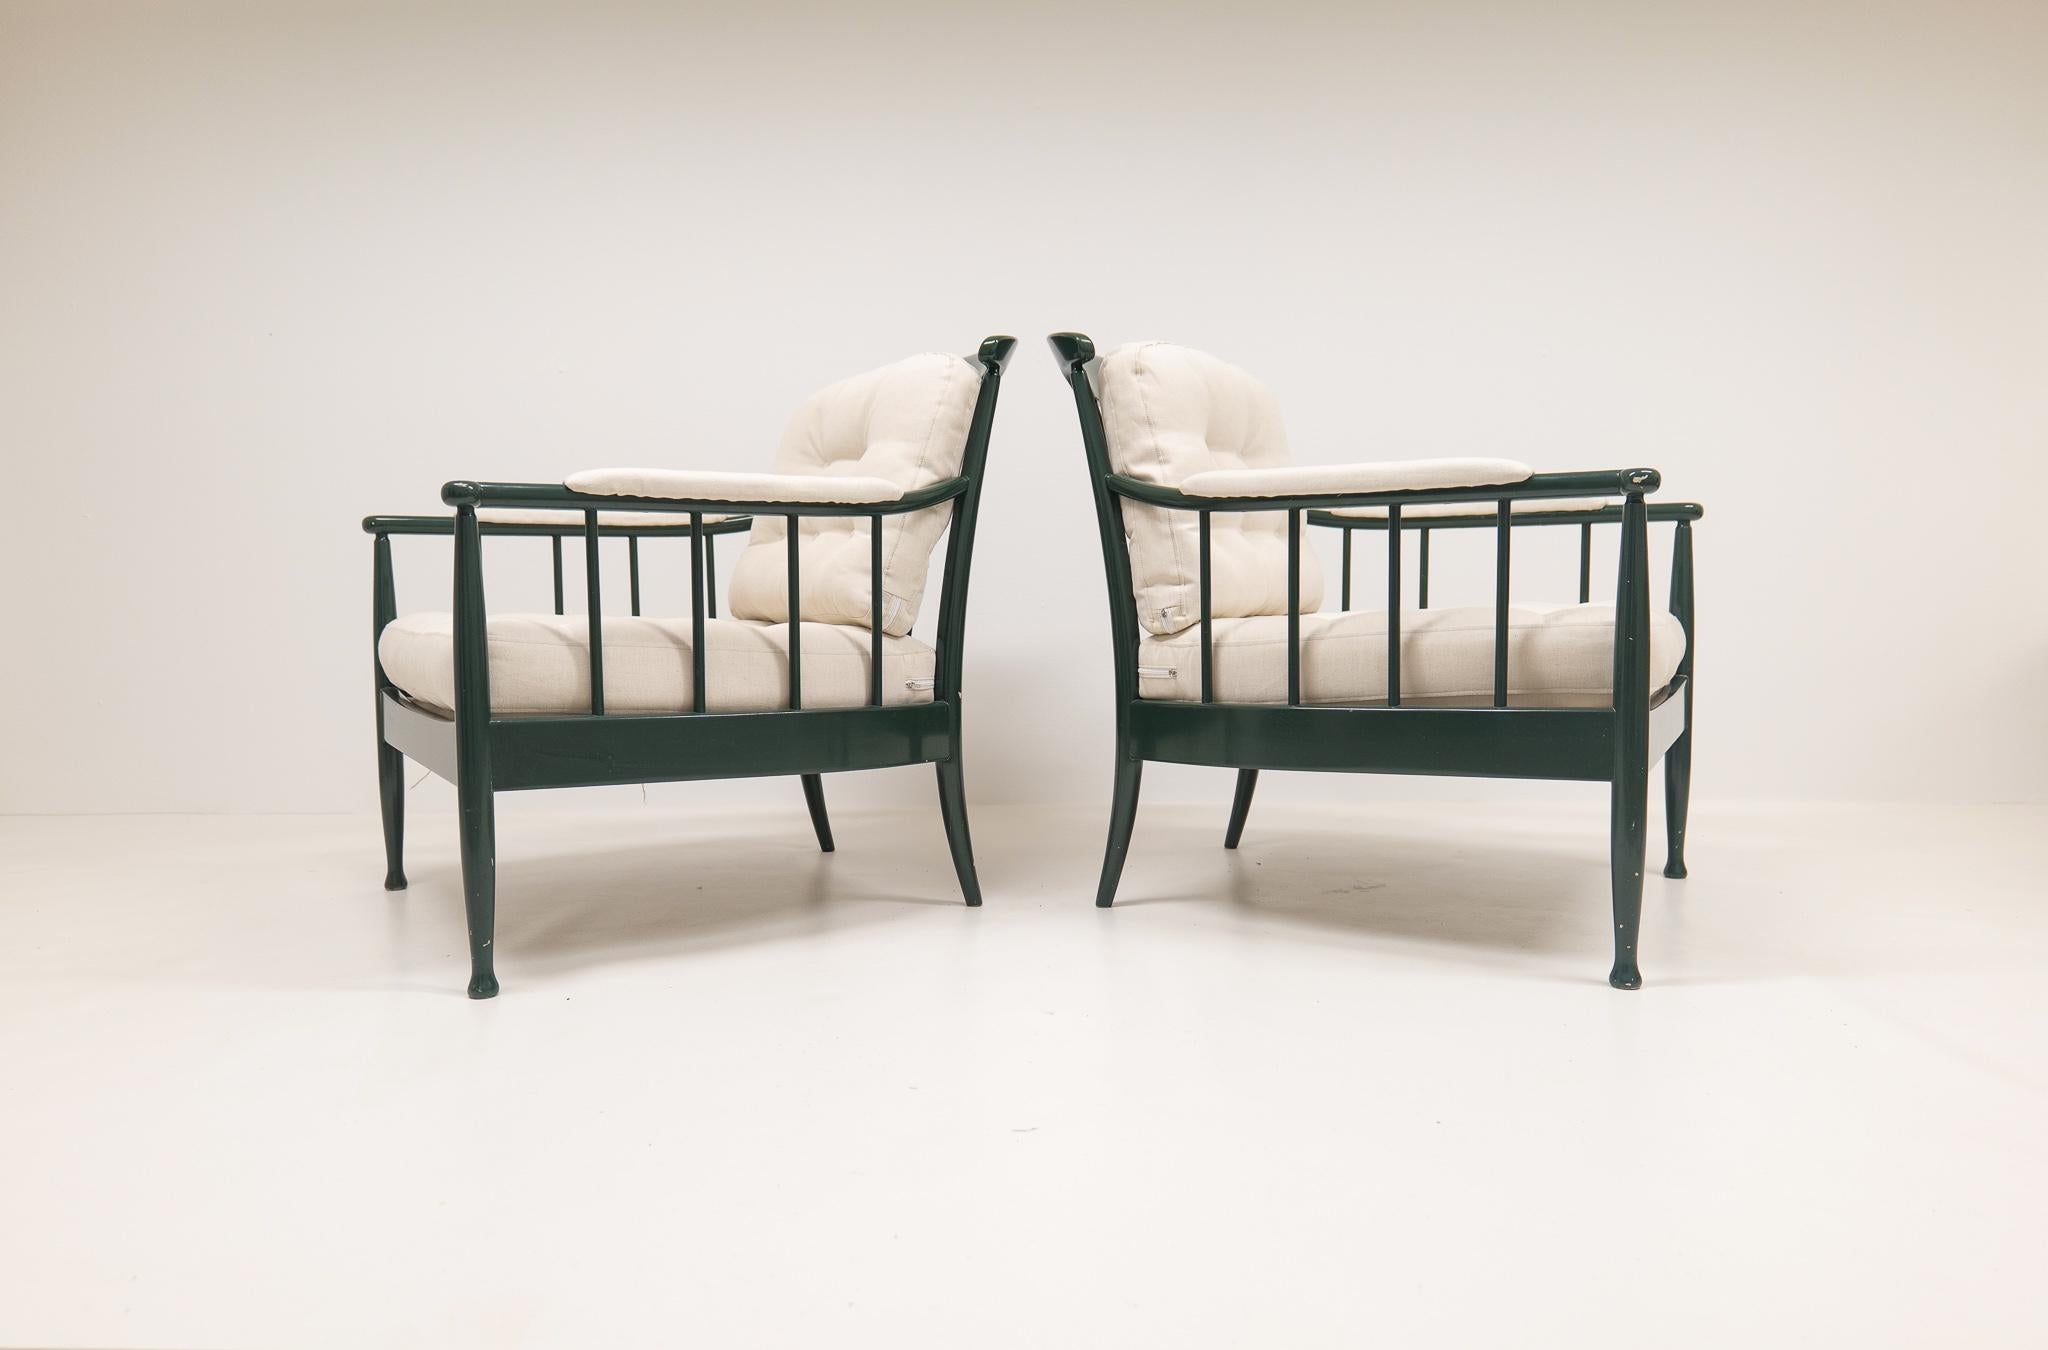 A pair of lounge chairs Designed by Kerstin Hörlin-Homqvist during the 1967 in Sweden and produced at OPE (Olof Persson Fåtöljindustri) high quality furniture’s. Green original lacquer color with some wear, but it is a nice looking green that works